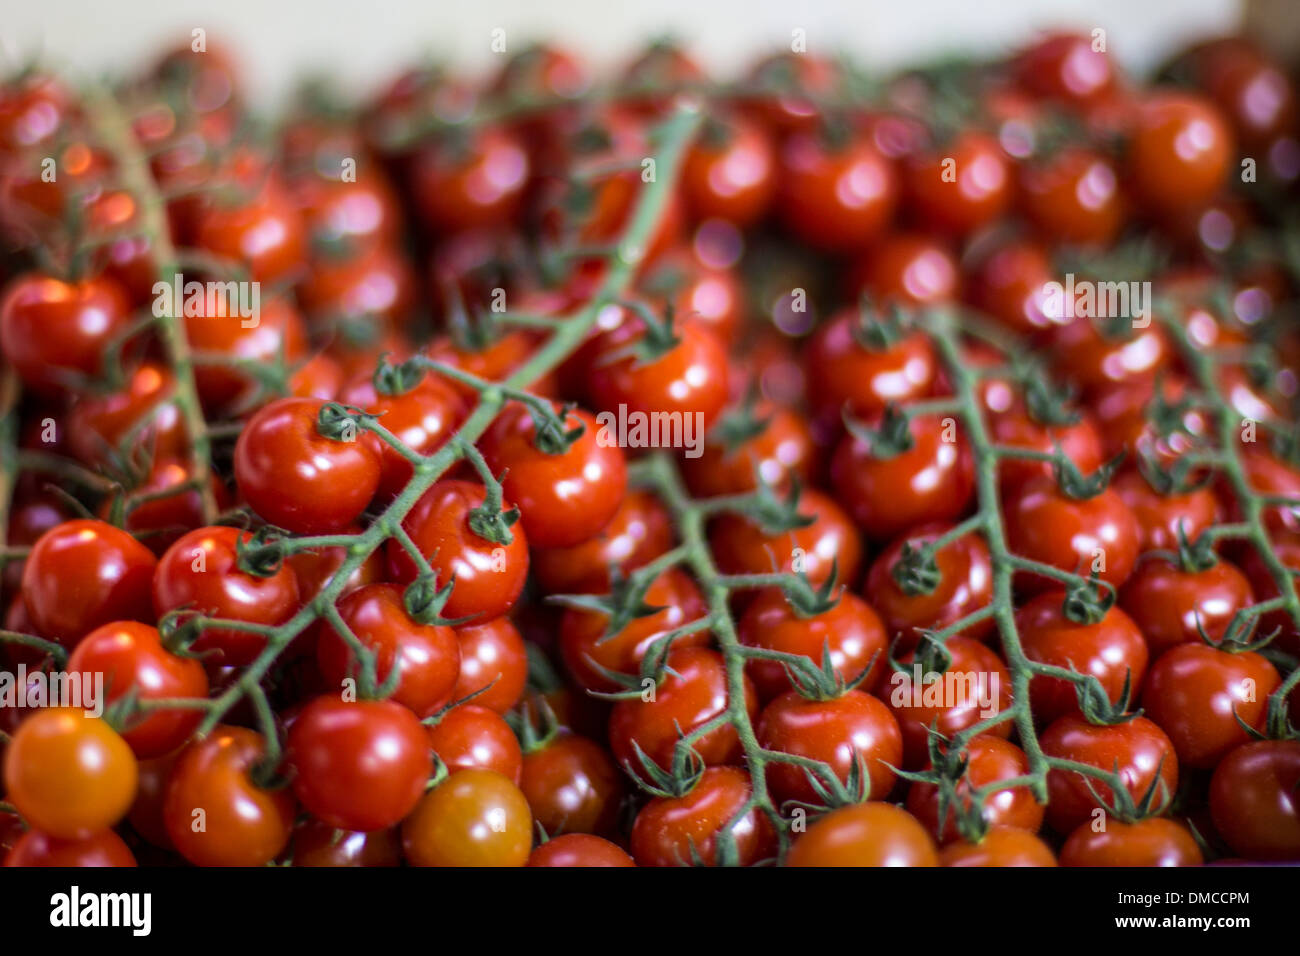 Cherry tomatoes on the vine for sale at Borough Market, London. Stock Photo